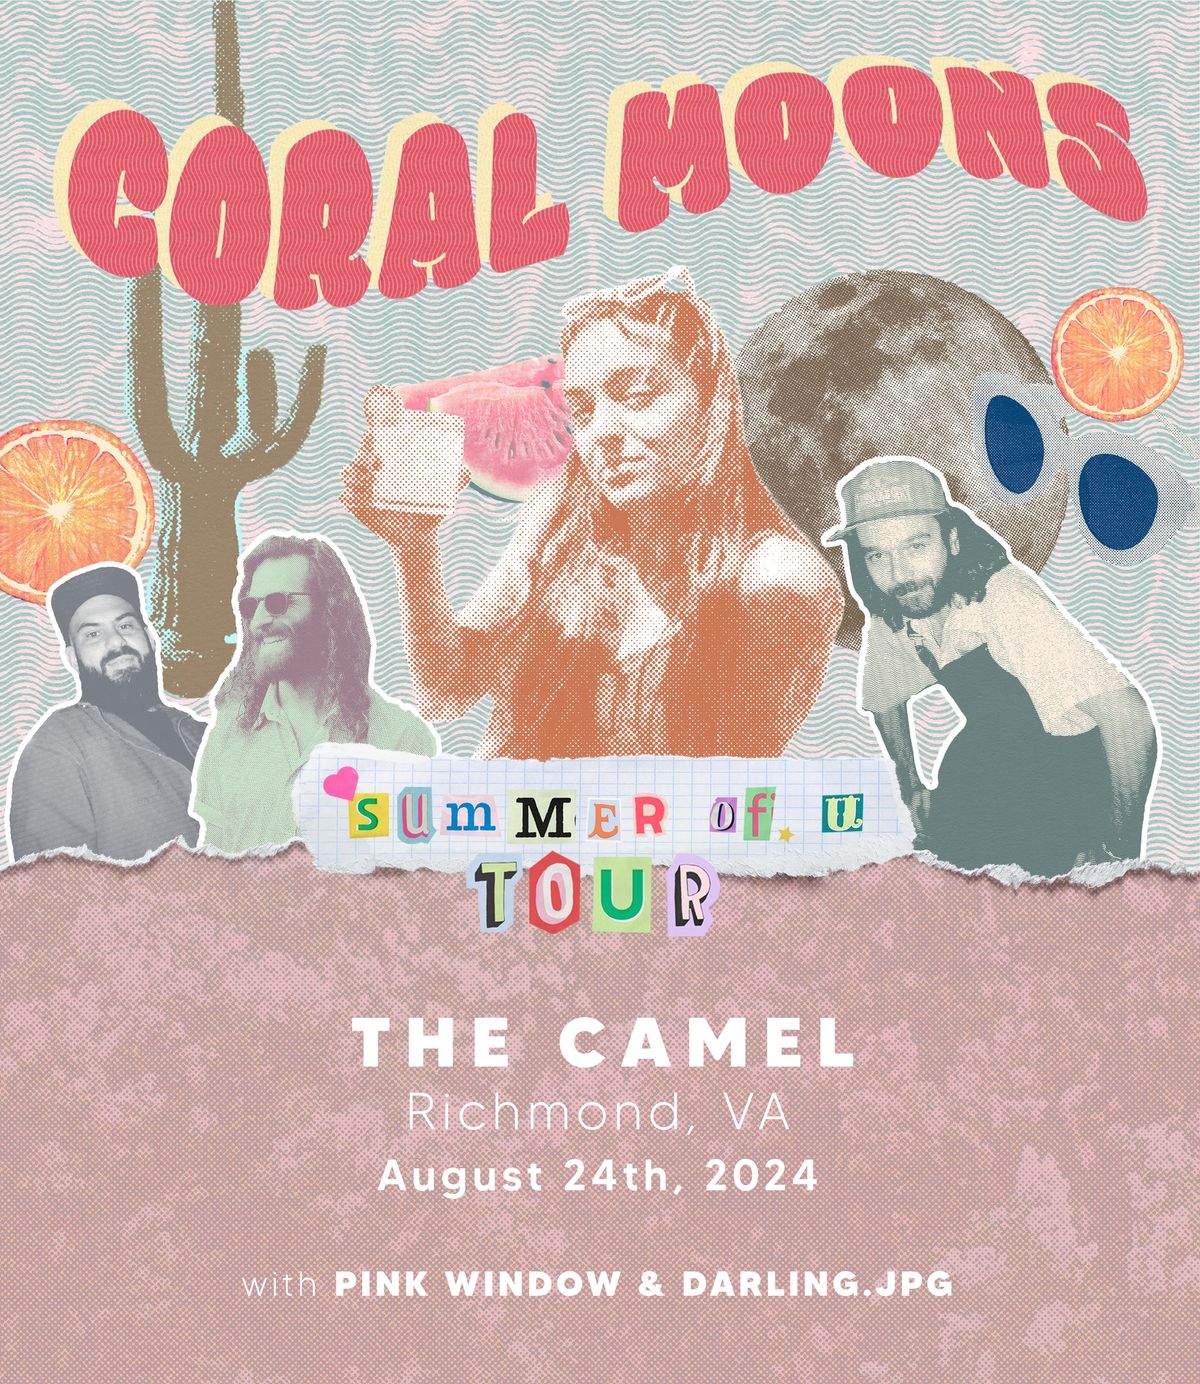 Coral Moons w\/ Darling.JPG, Human Worm at The Camel 9\/24